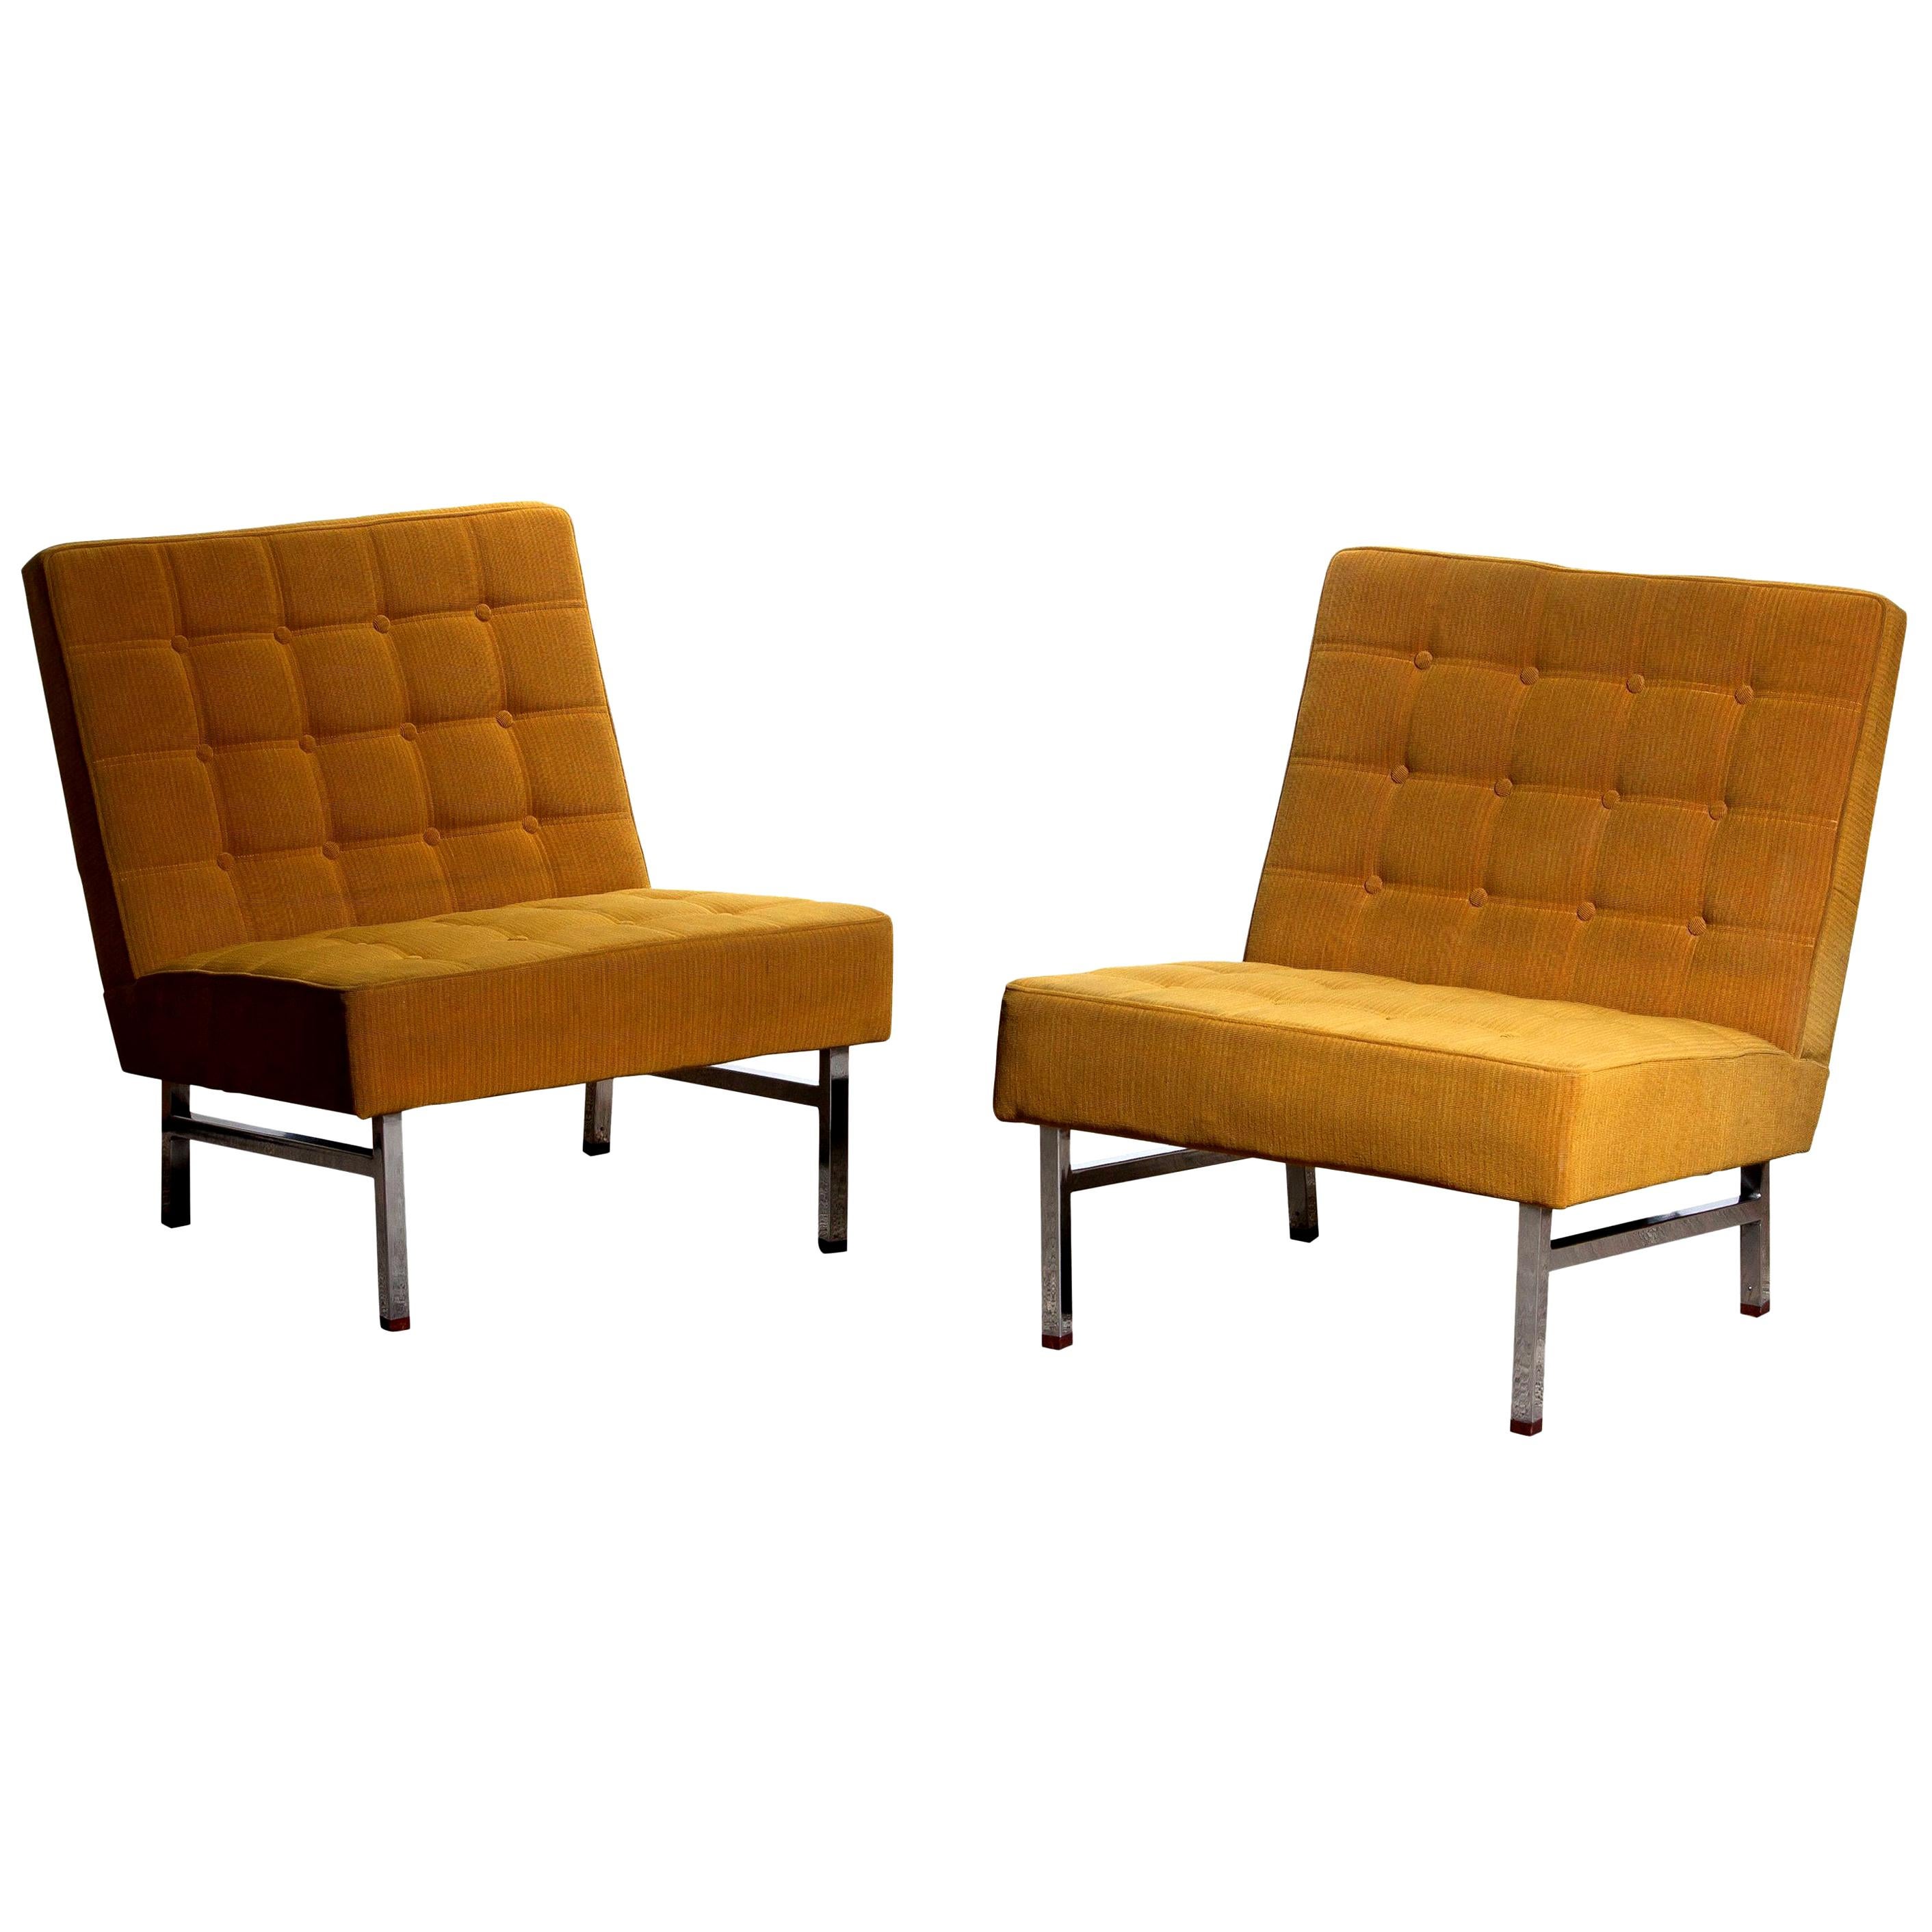 1960, set of two comfortable and extremely rare lounge chairs designed by Karl Erik Ekselius for JOC Möbler Vetlanda, Sweden.
Both chairs are original and in good condition. Somewhat dry filling.
Stands are made of chromed metal with teak ends.
 